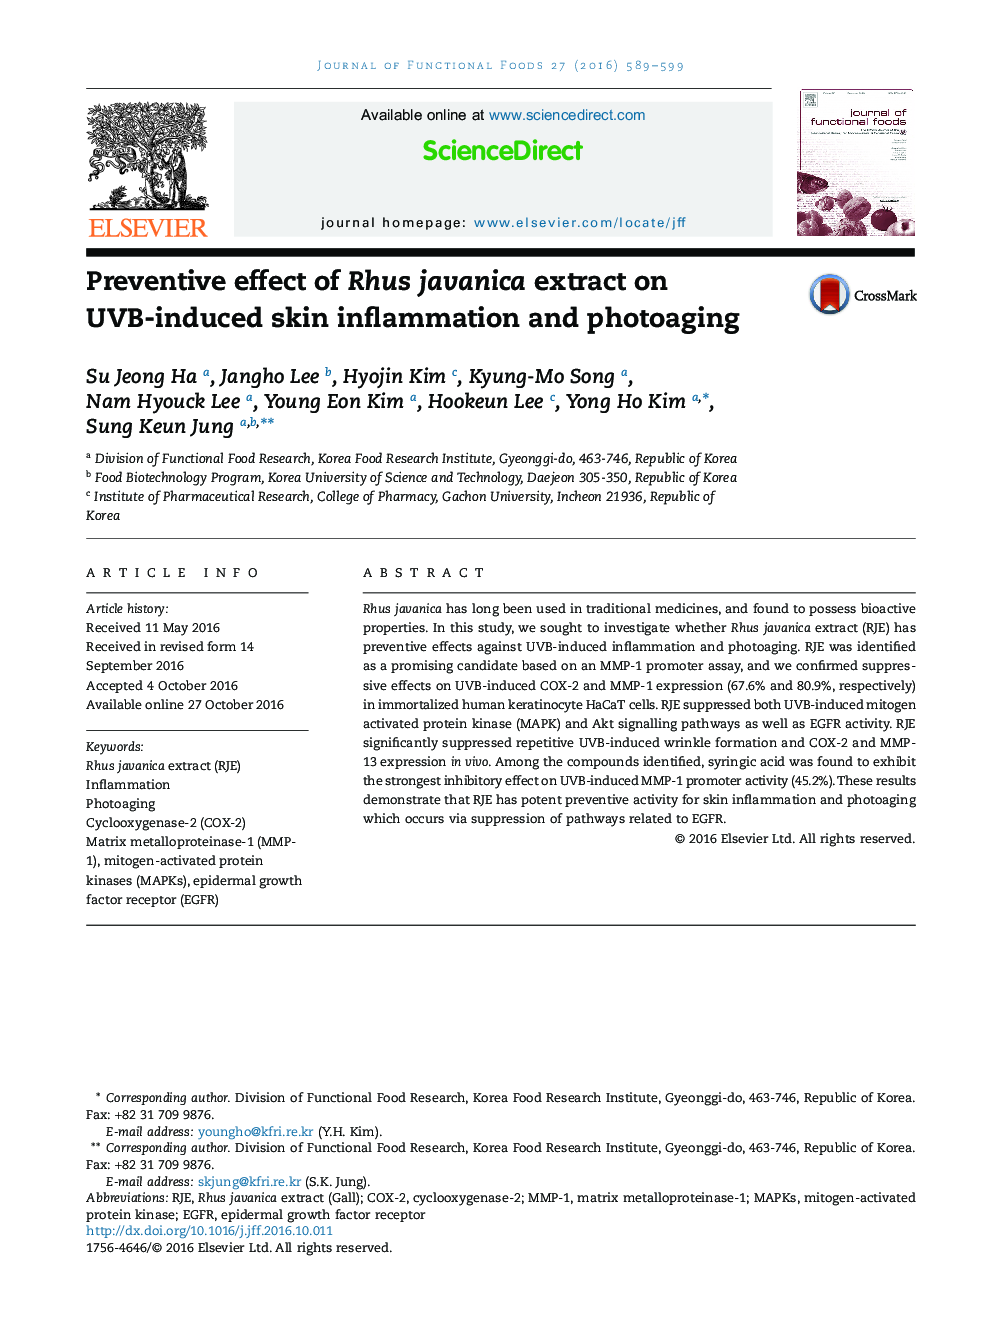 Preventive effect of Rhus javanica extract on UVB-induced skin inflammation and photoaging